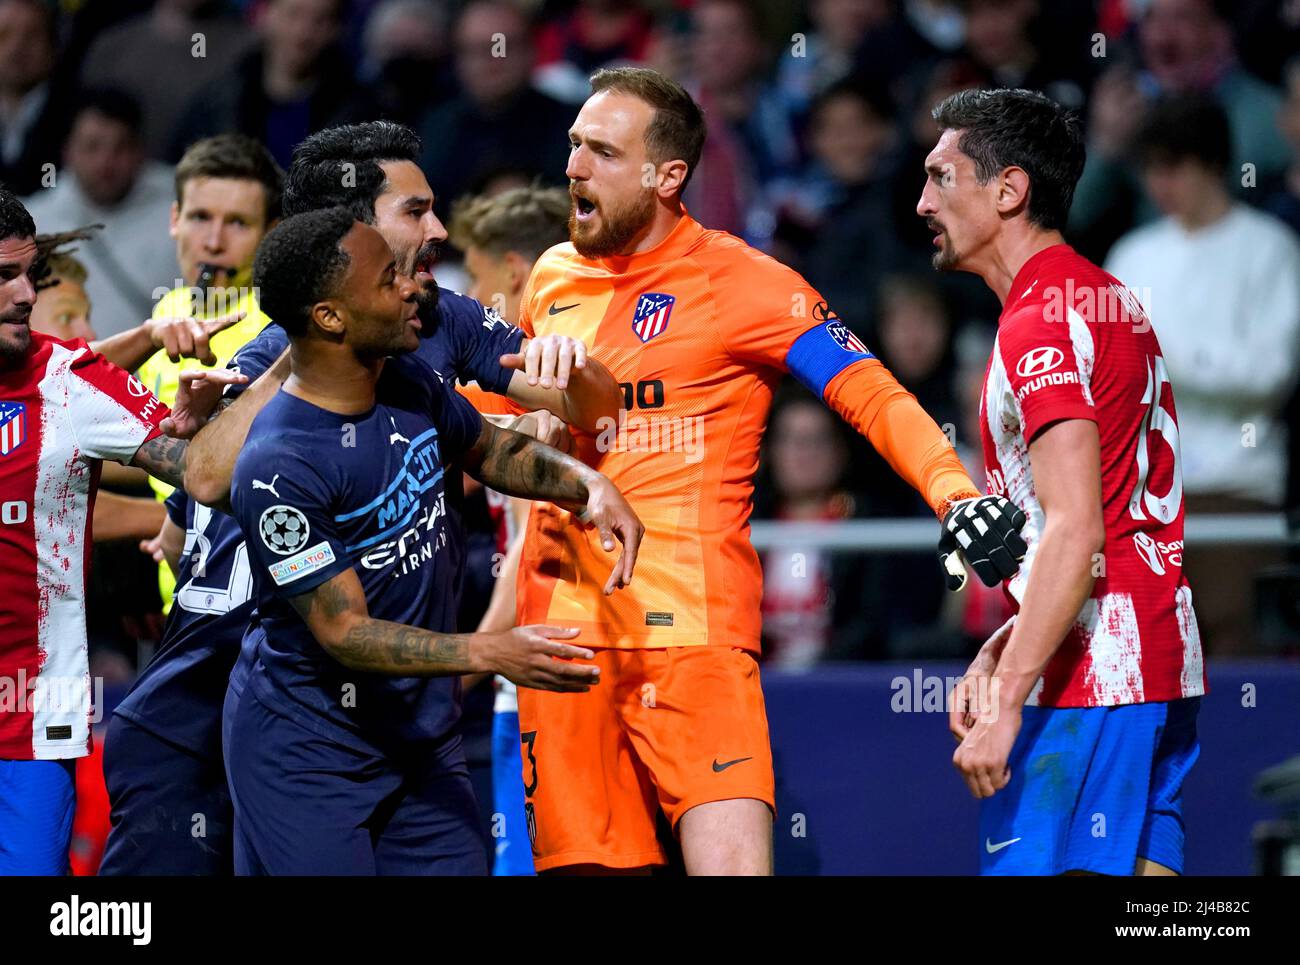 Atletico Madrid goalkeeper Jan Oblak (centre) steps in between Stefan Savic and Manchester City's Raheem Sterling as tempers flare during the UEFA Champions League quarter final, second leg match at the Wanda Metropolitano Stadium, Madrid. Picture date: Wednesday April 13, 2022. Stock Photo